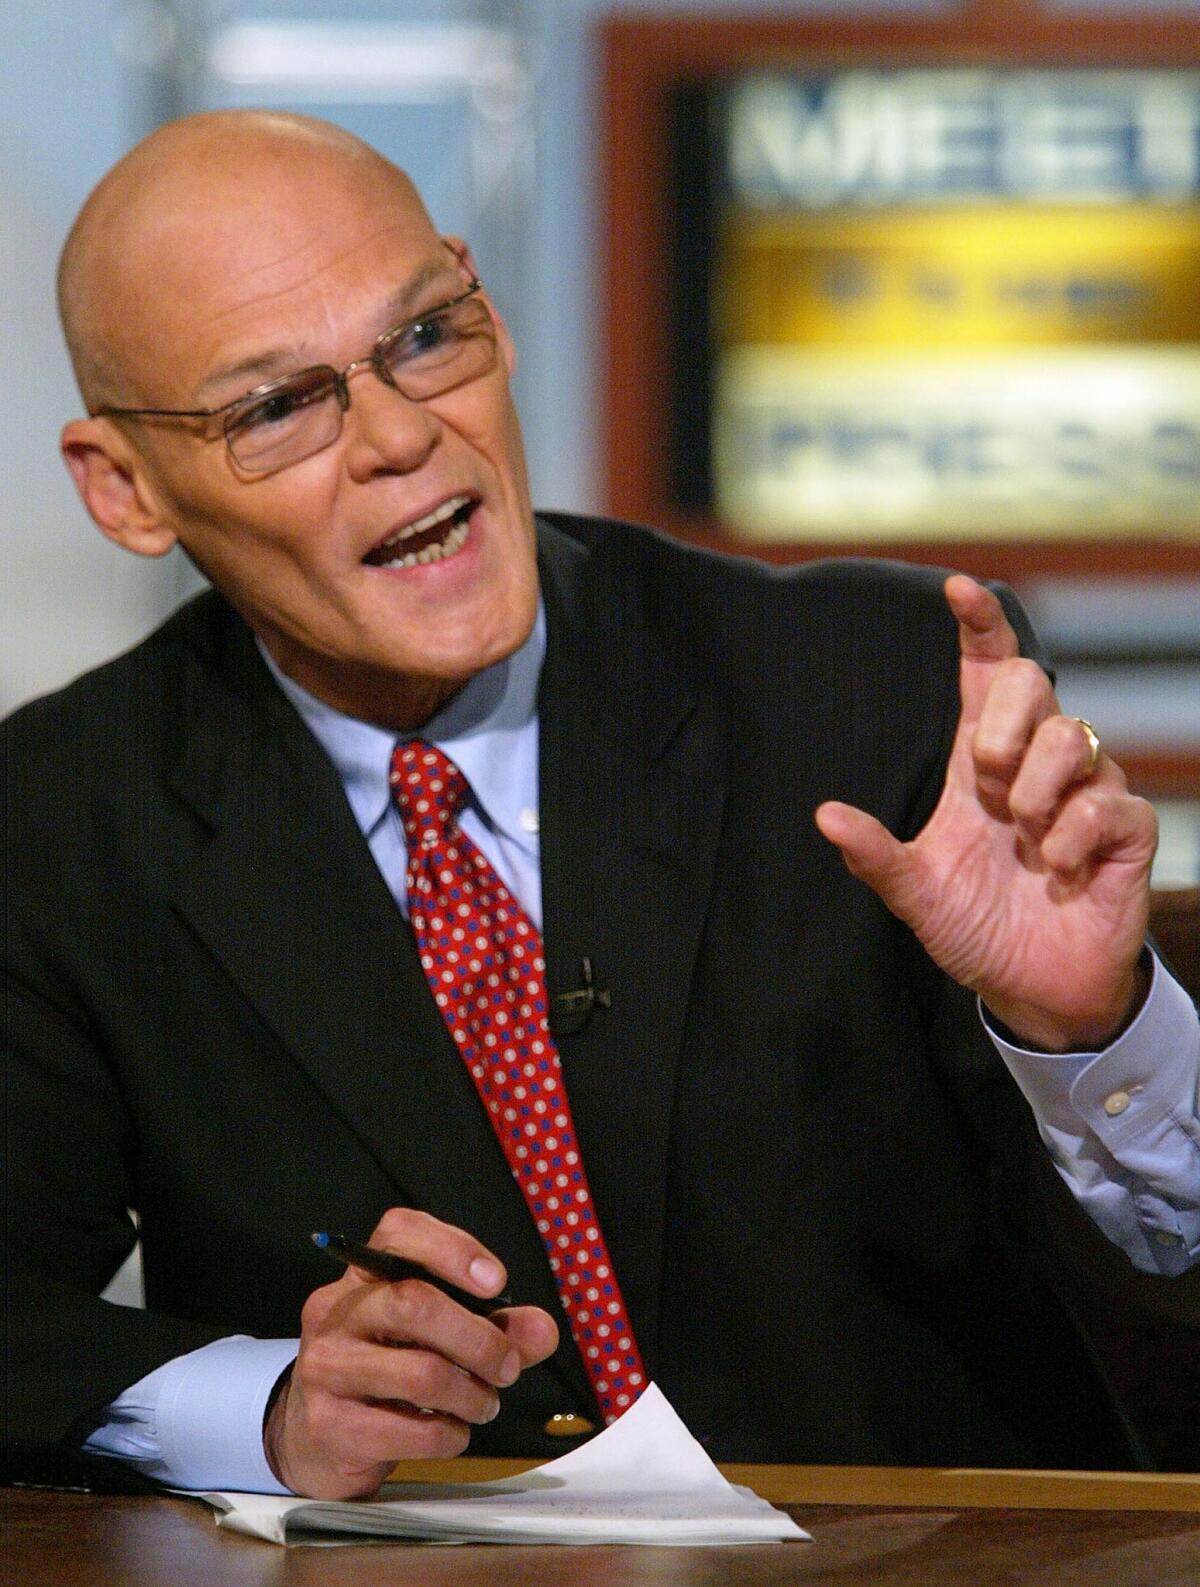 Democratic strategist James Carville during a taping of NBC's "Meet the Press" in Washington.